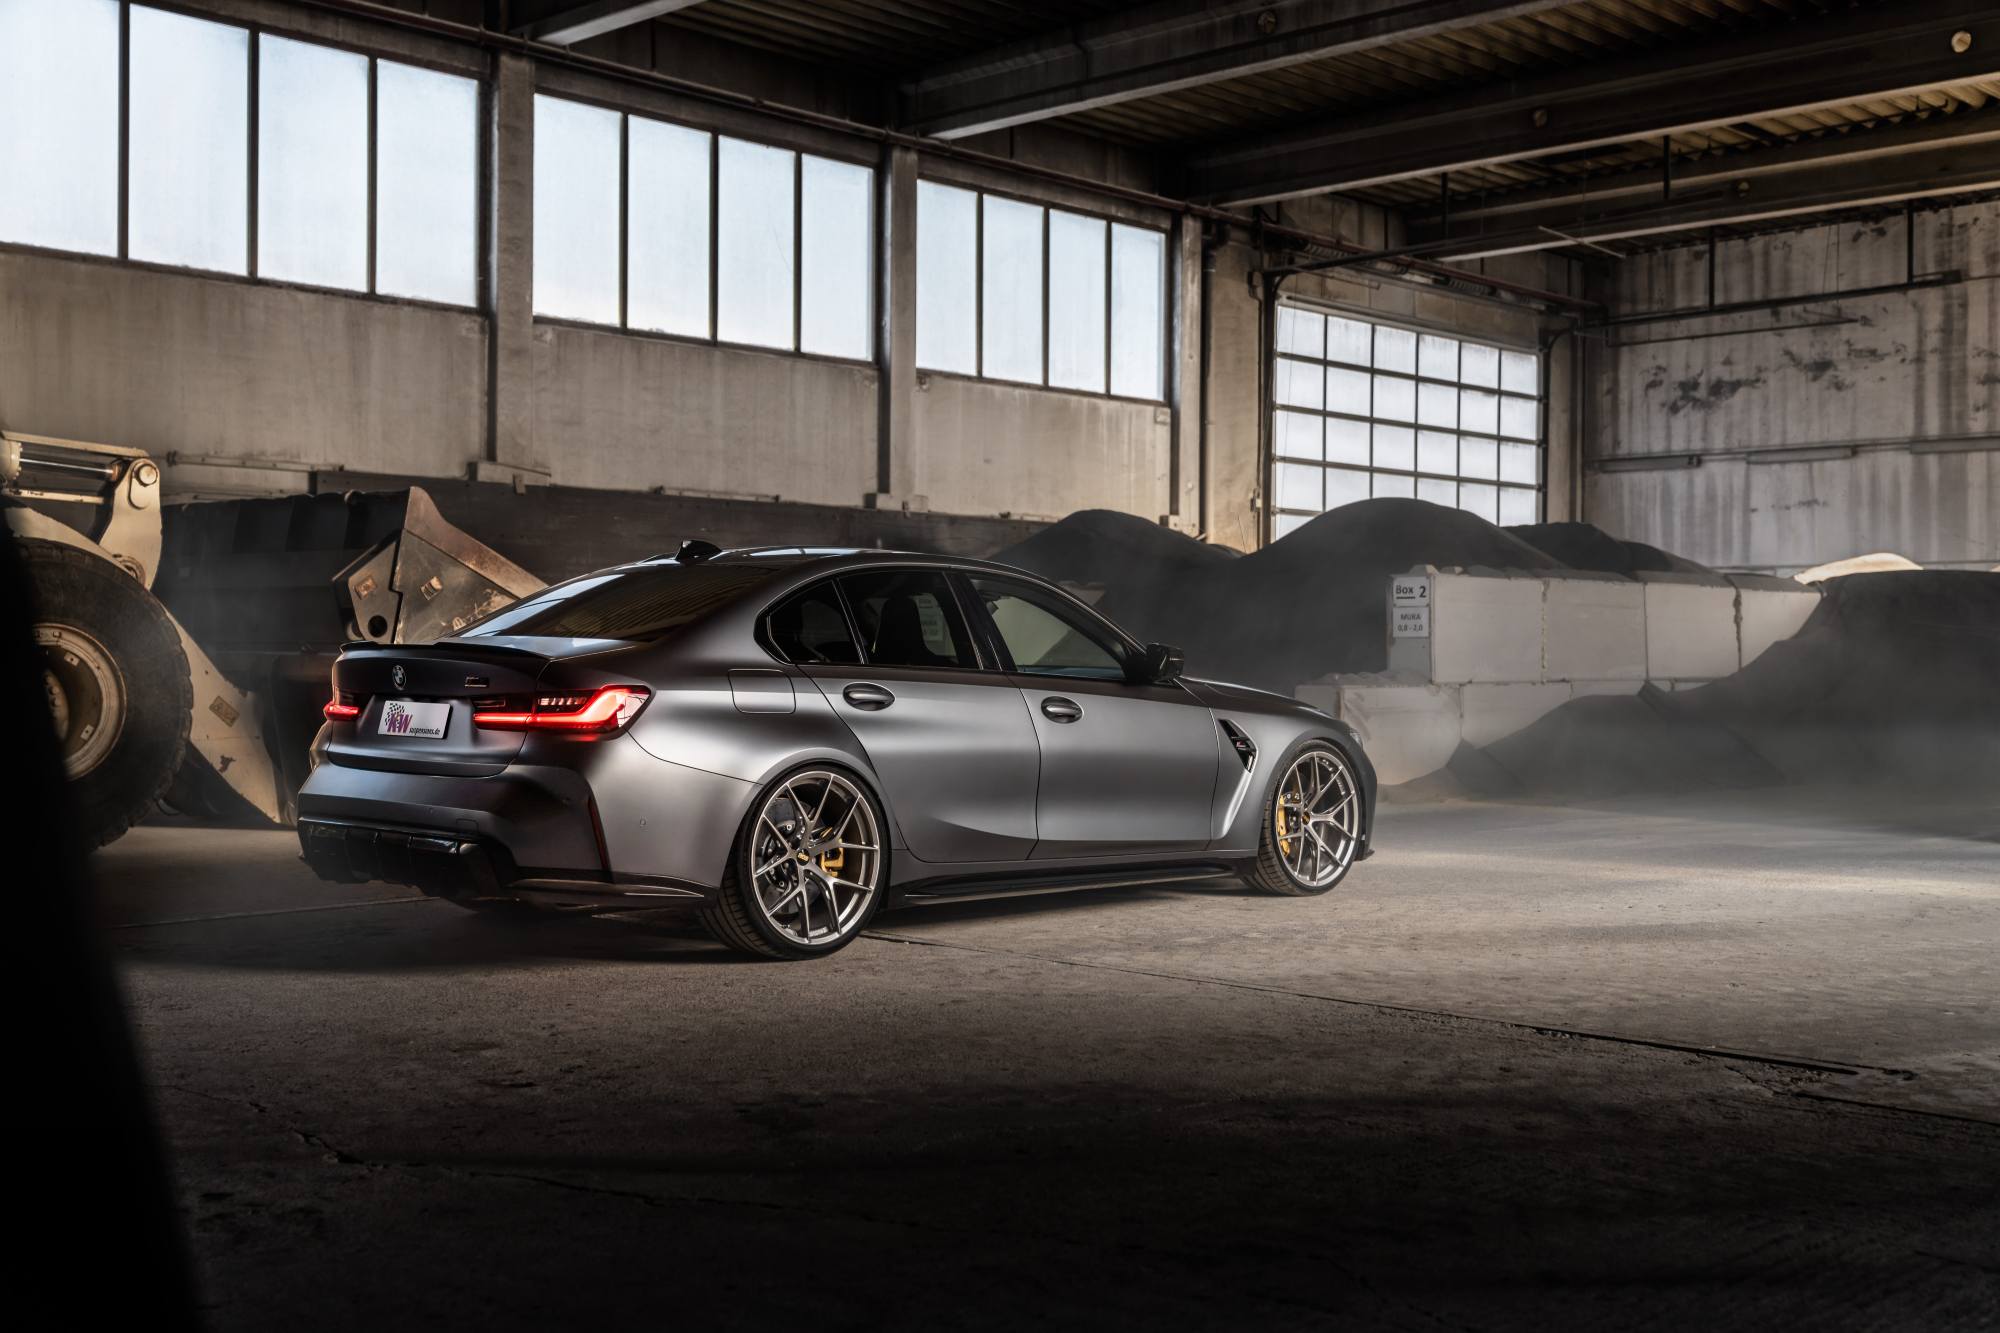 An additional lowering of 20 to 35 millimeters at the front axle and 15 to 30 millimeters at the rear axle of the BMW M4 Coupé (G82) is possible thanks to the KW V3 coilover